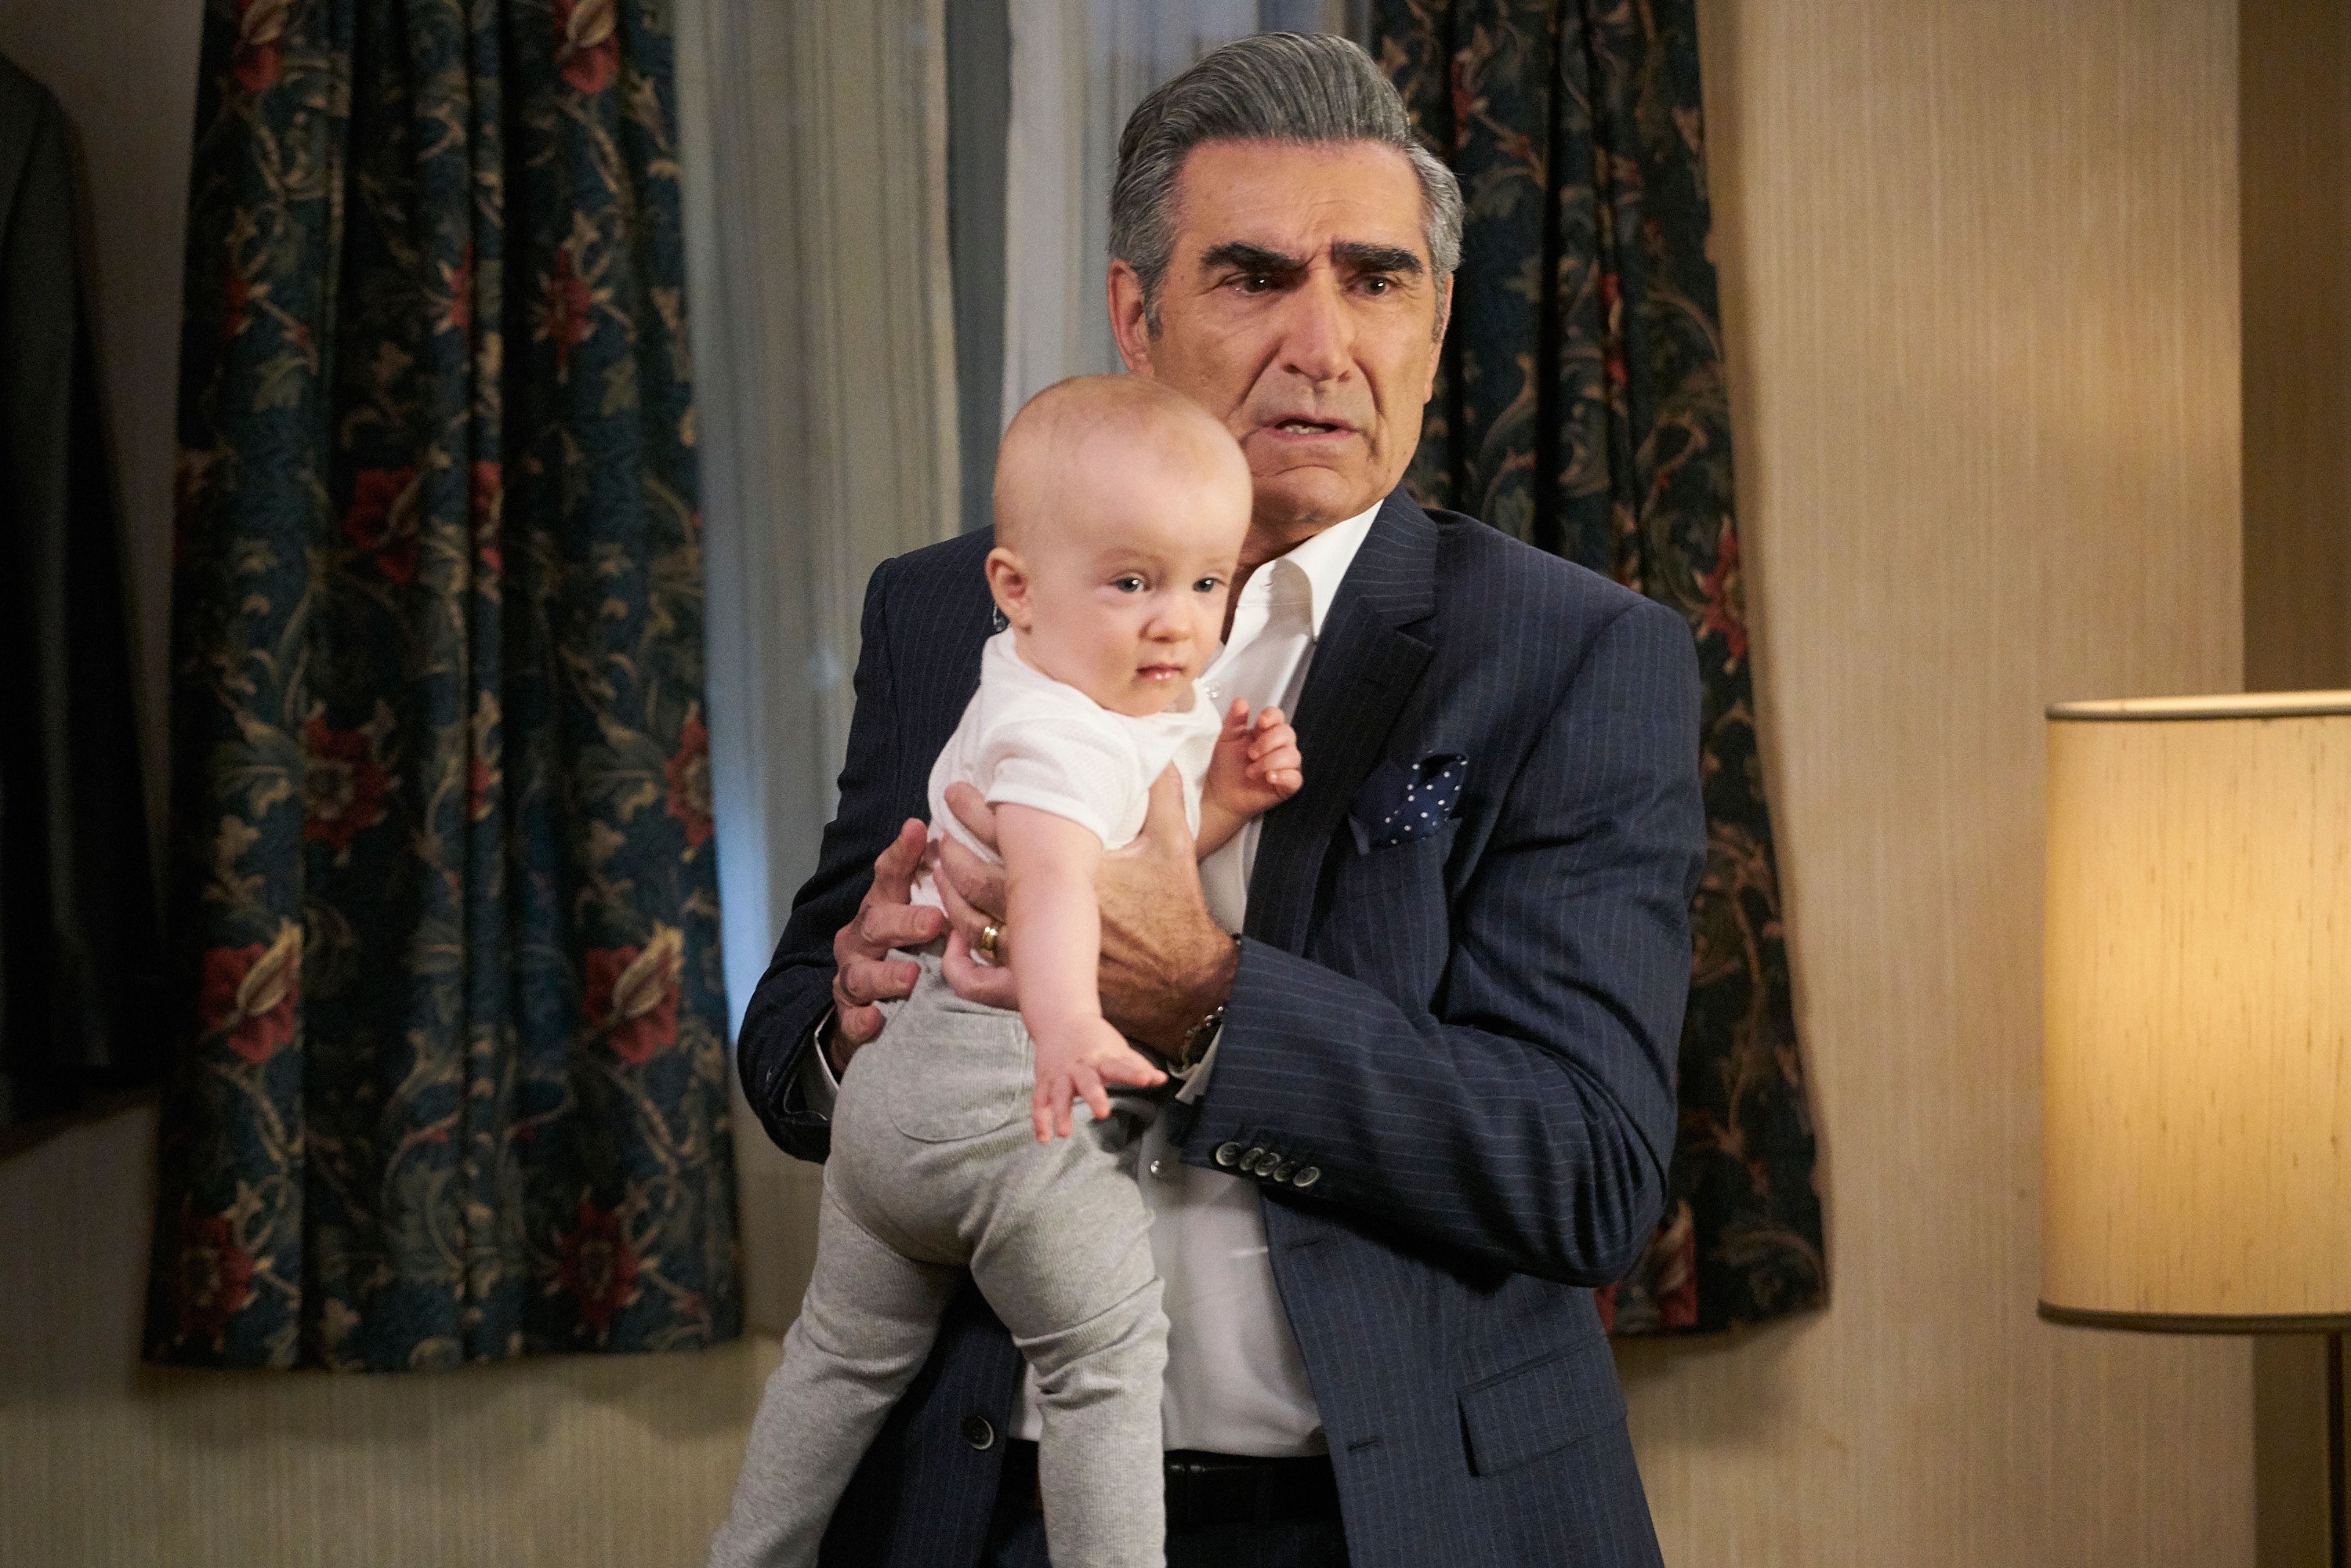 Johnny Rose looks confused while holding a baby